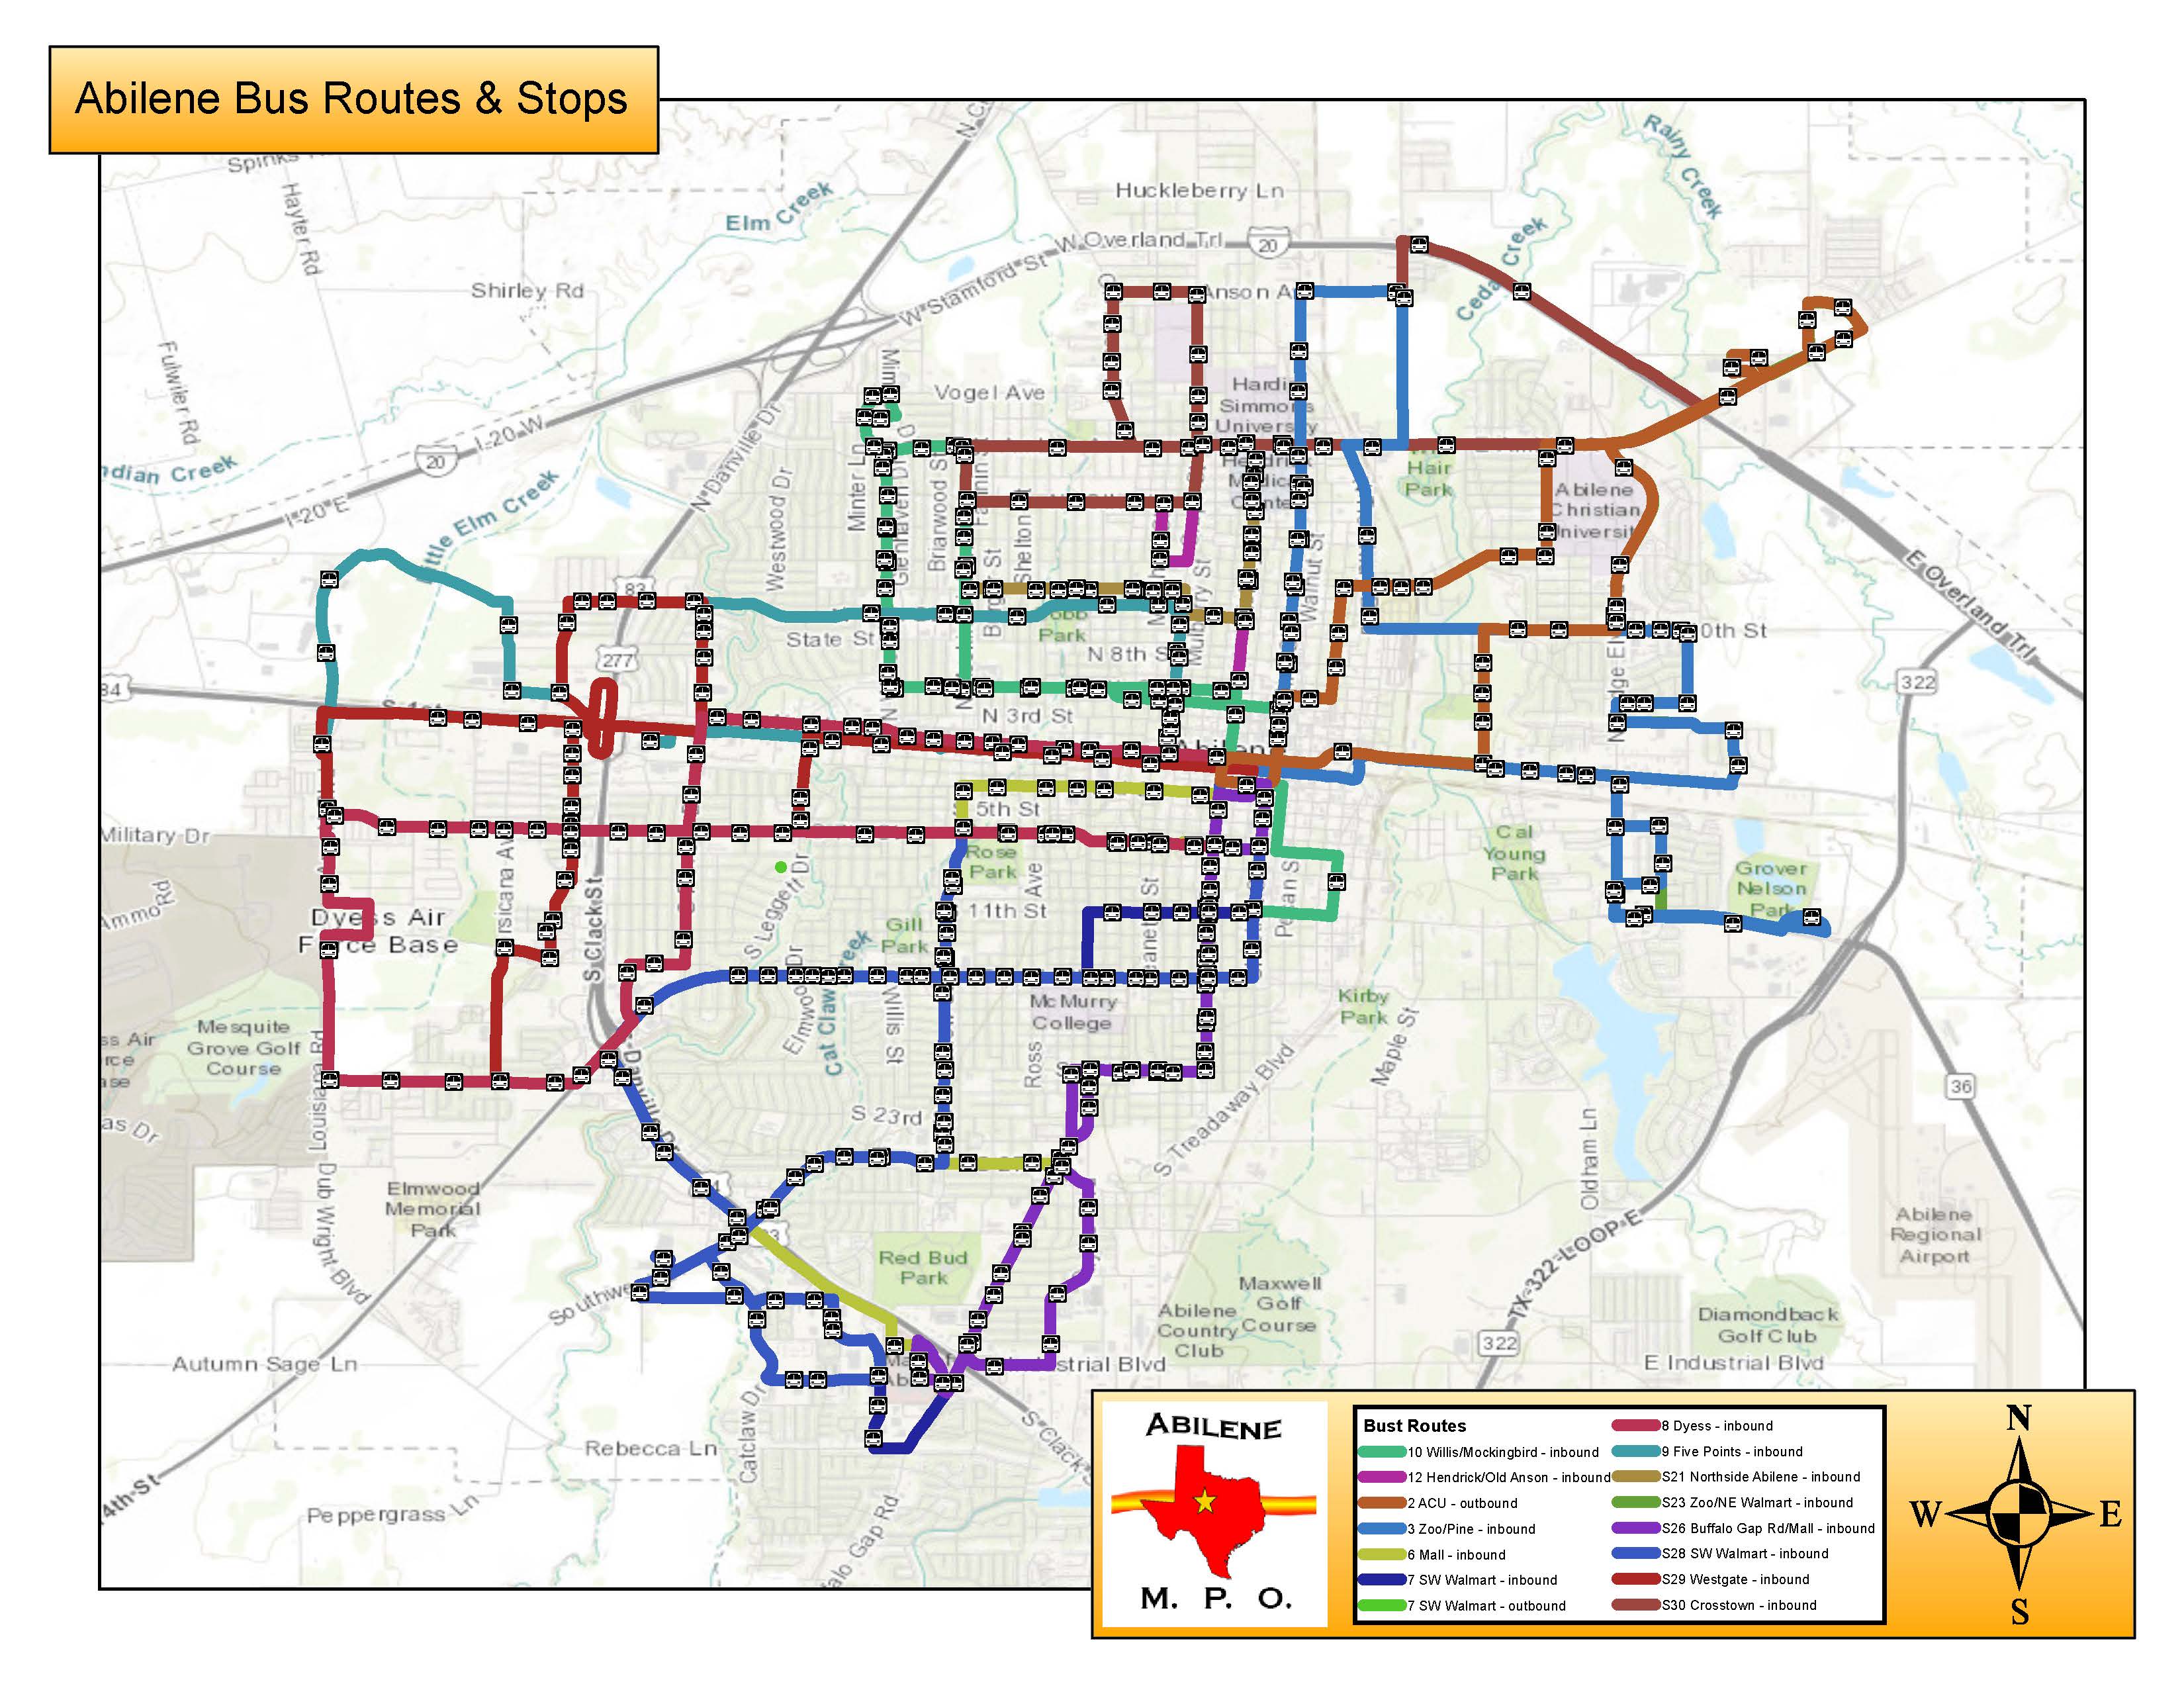 Map of Abilene Bus routes